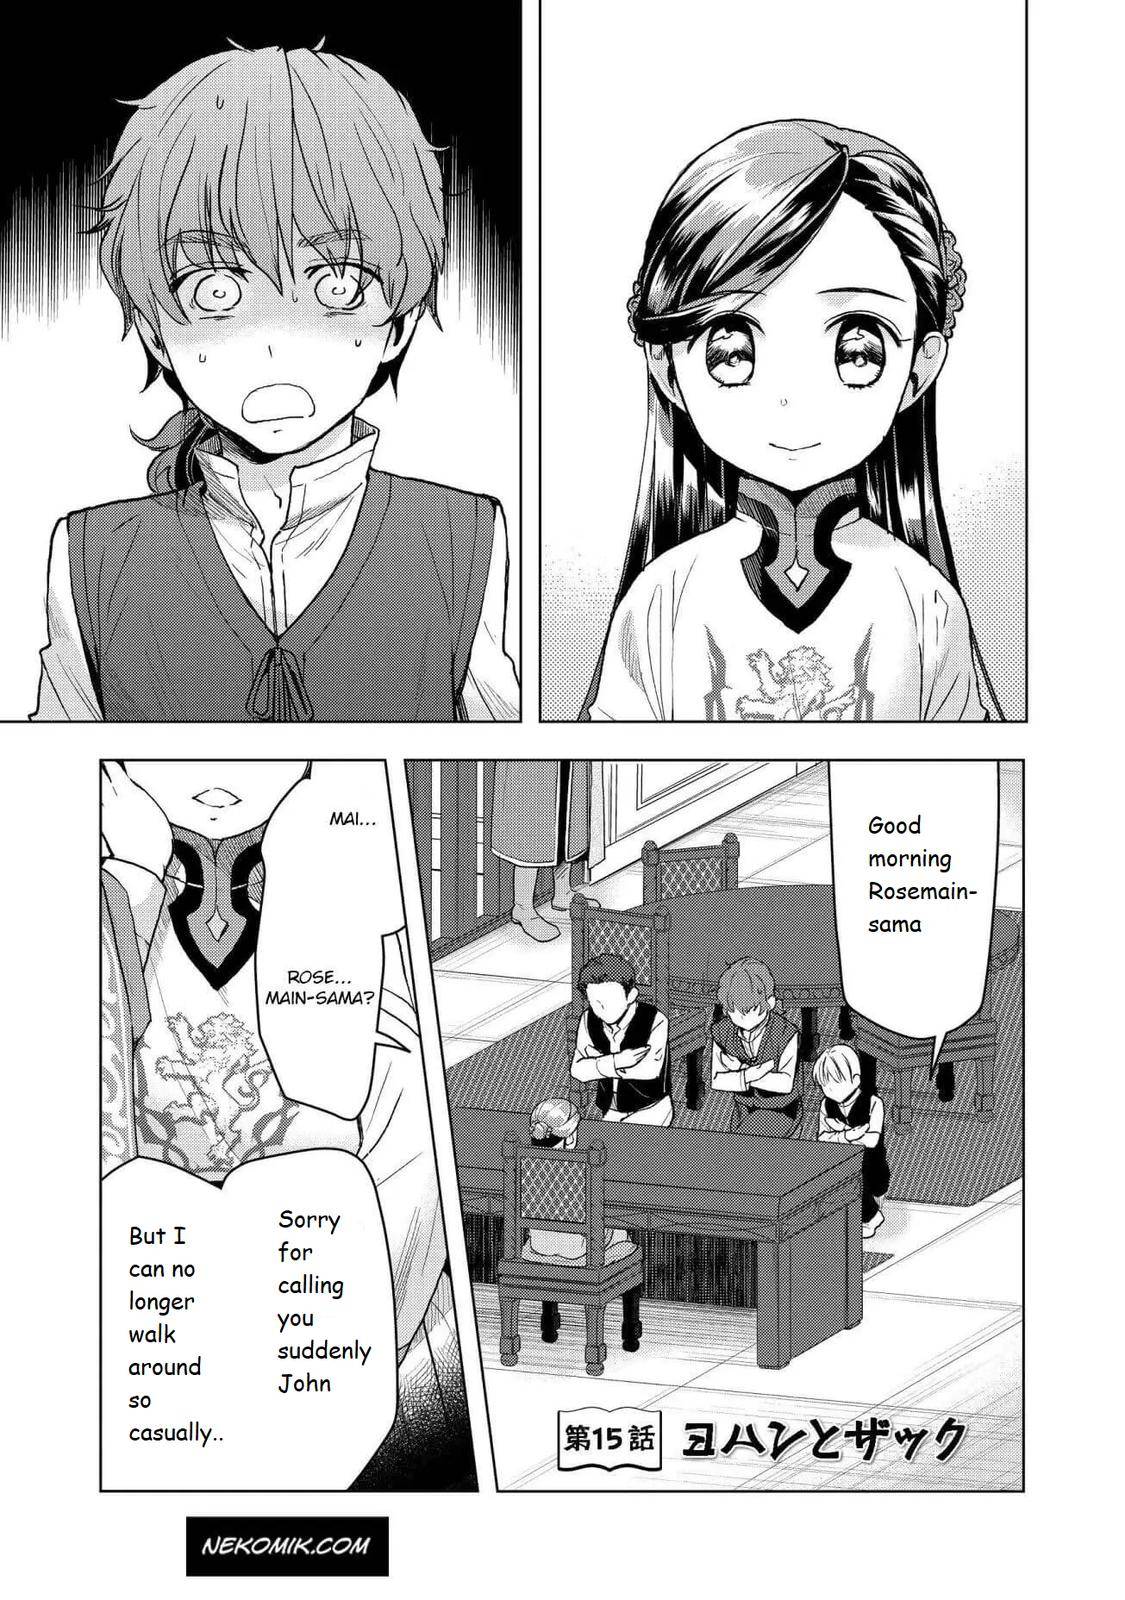 Read Ascendance of a Bookworm Part 3 Manga English [New Chapters